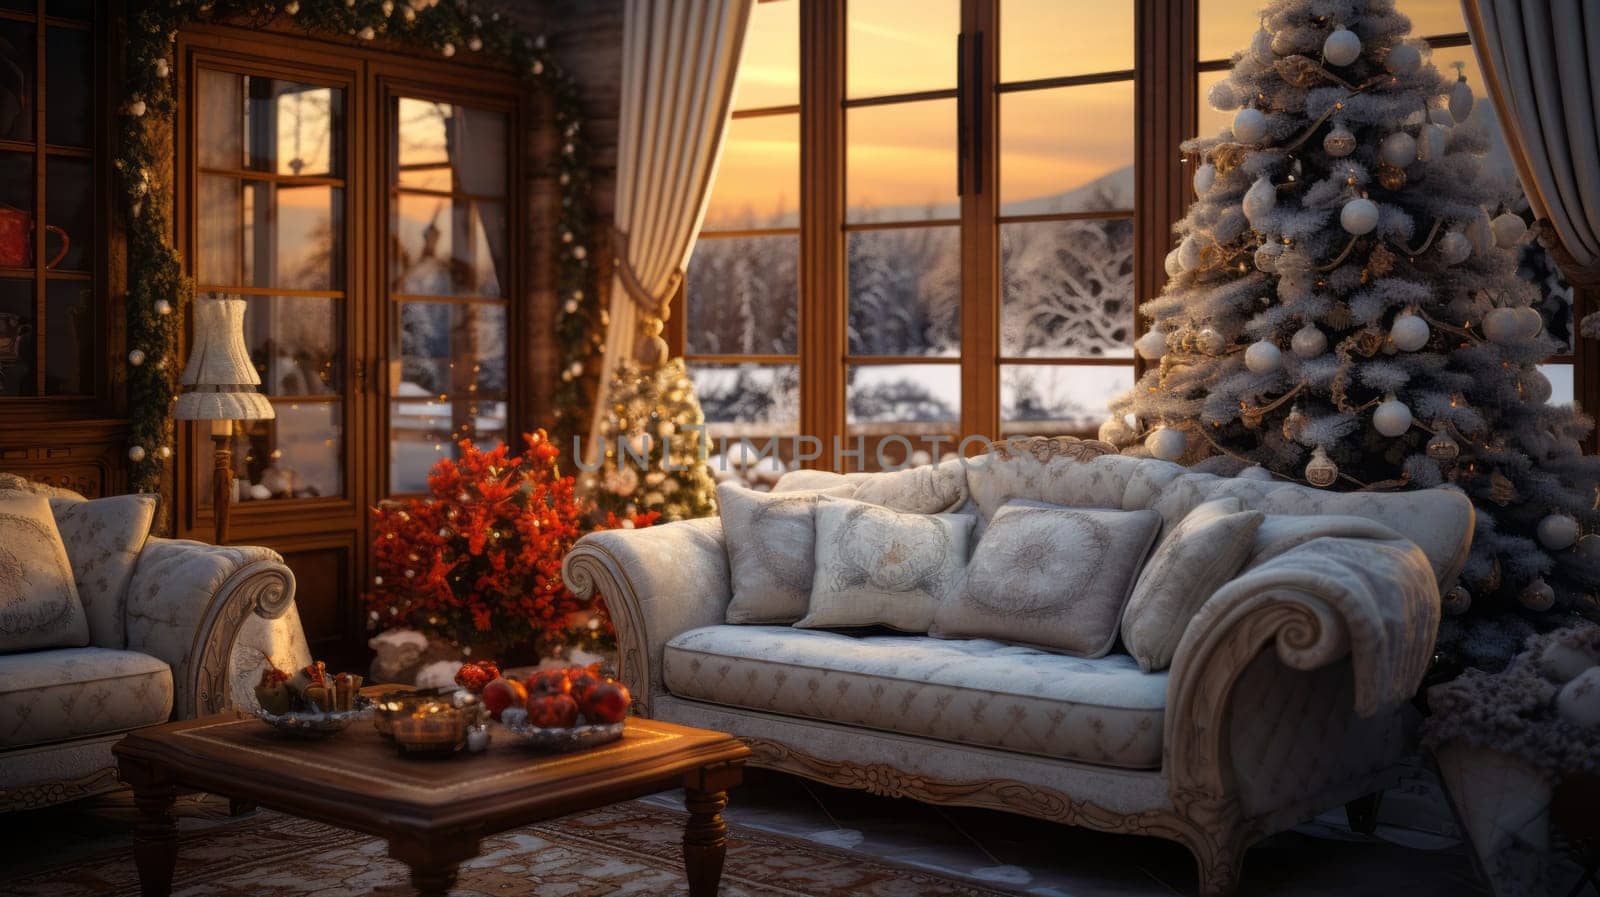 Interior of a cozy country house with a white sofa, a silver Christmas tree and a large window.